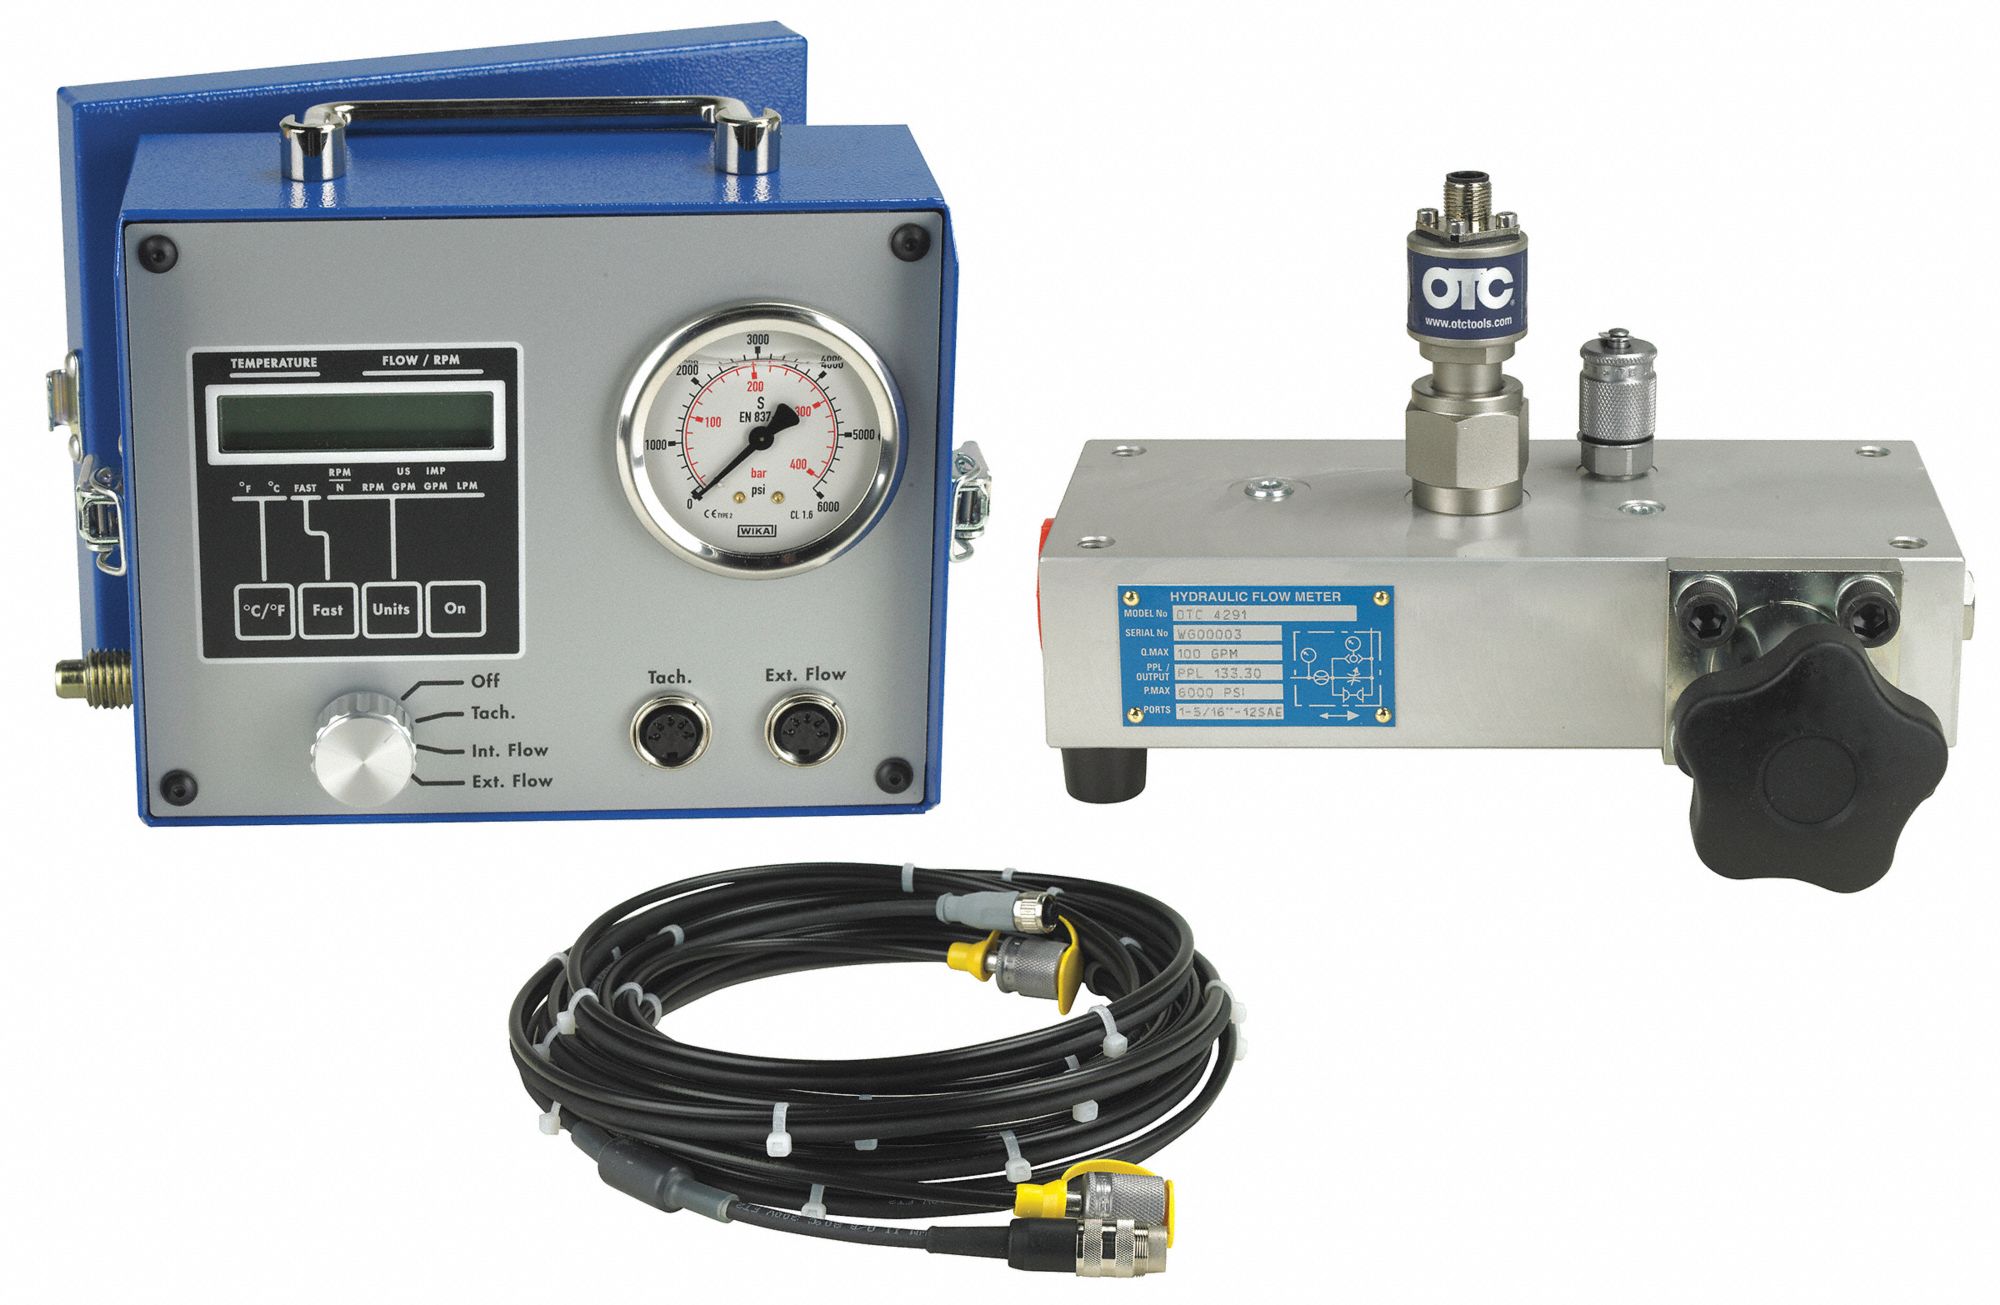 otc-2-5-to-100-gpm-capacity-1-2-in-size-digital-hydraulic-flow-test-kit-52vh47-4285-grainger